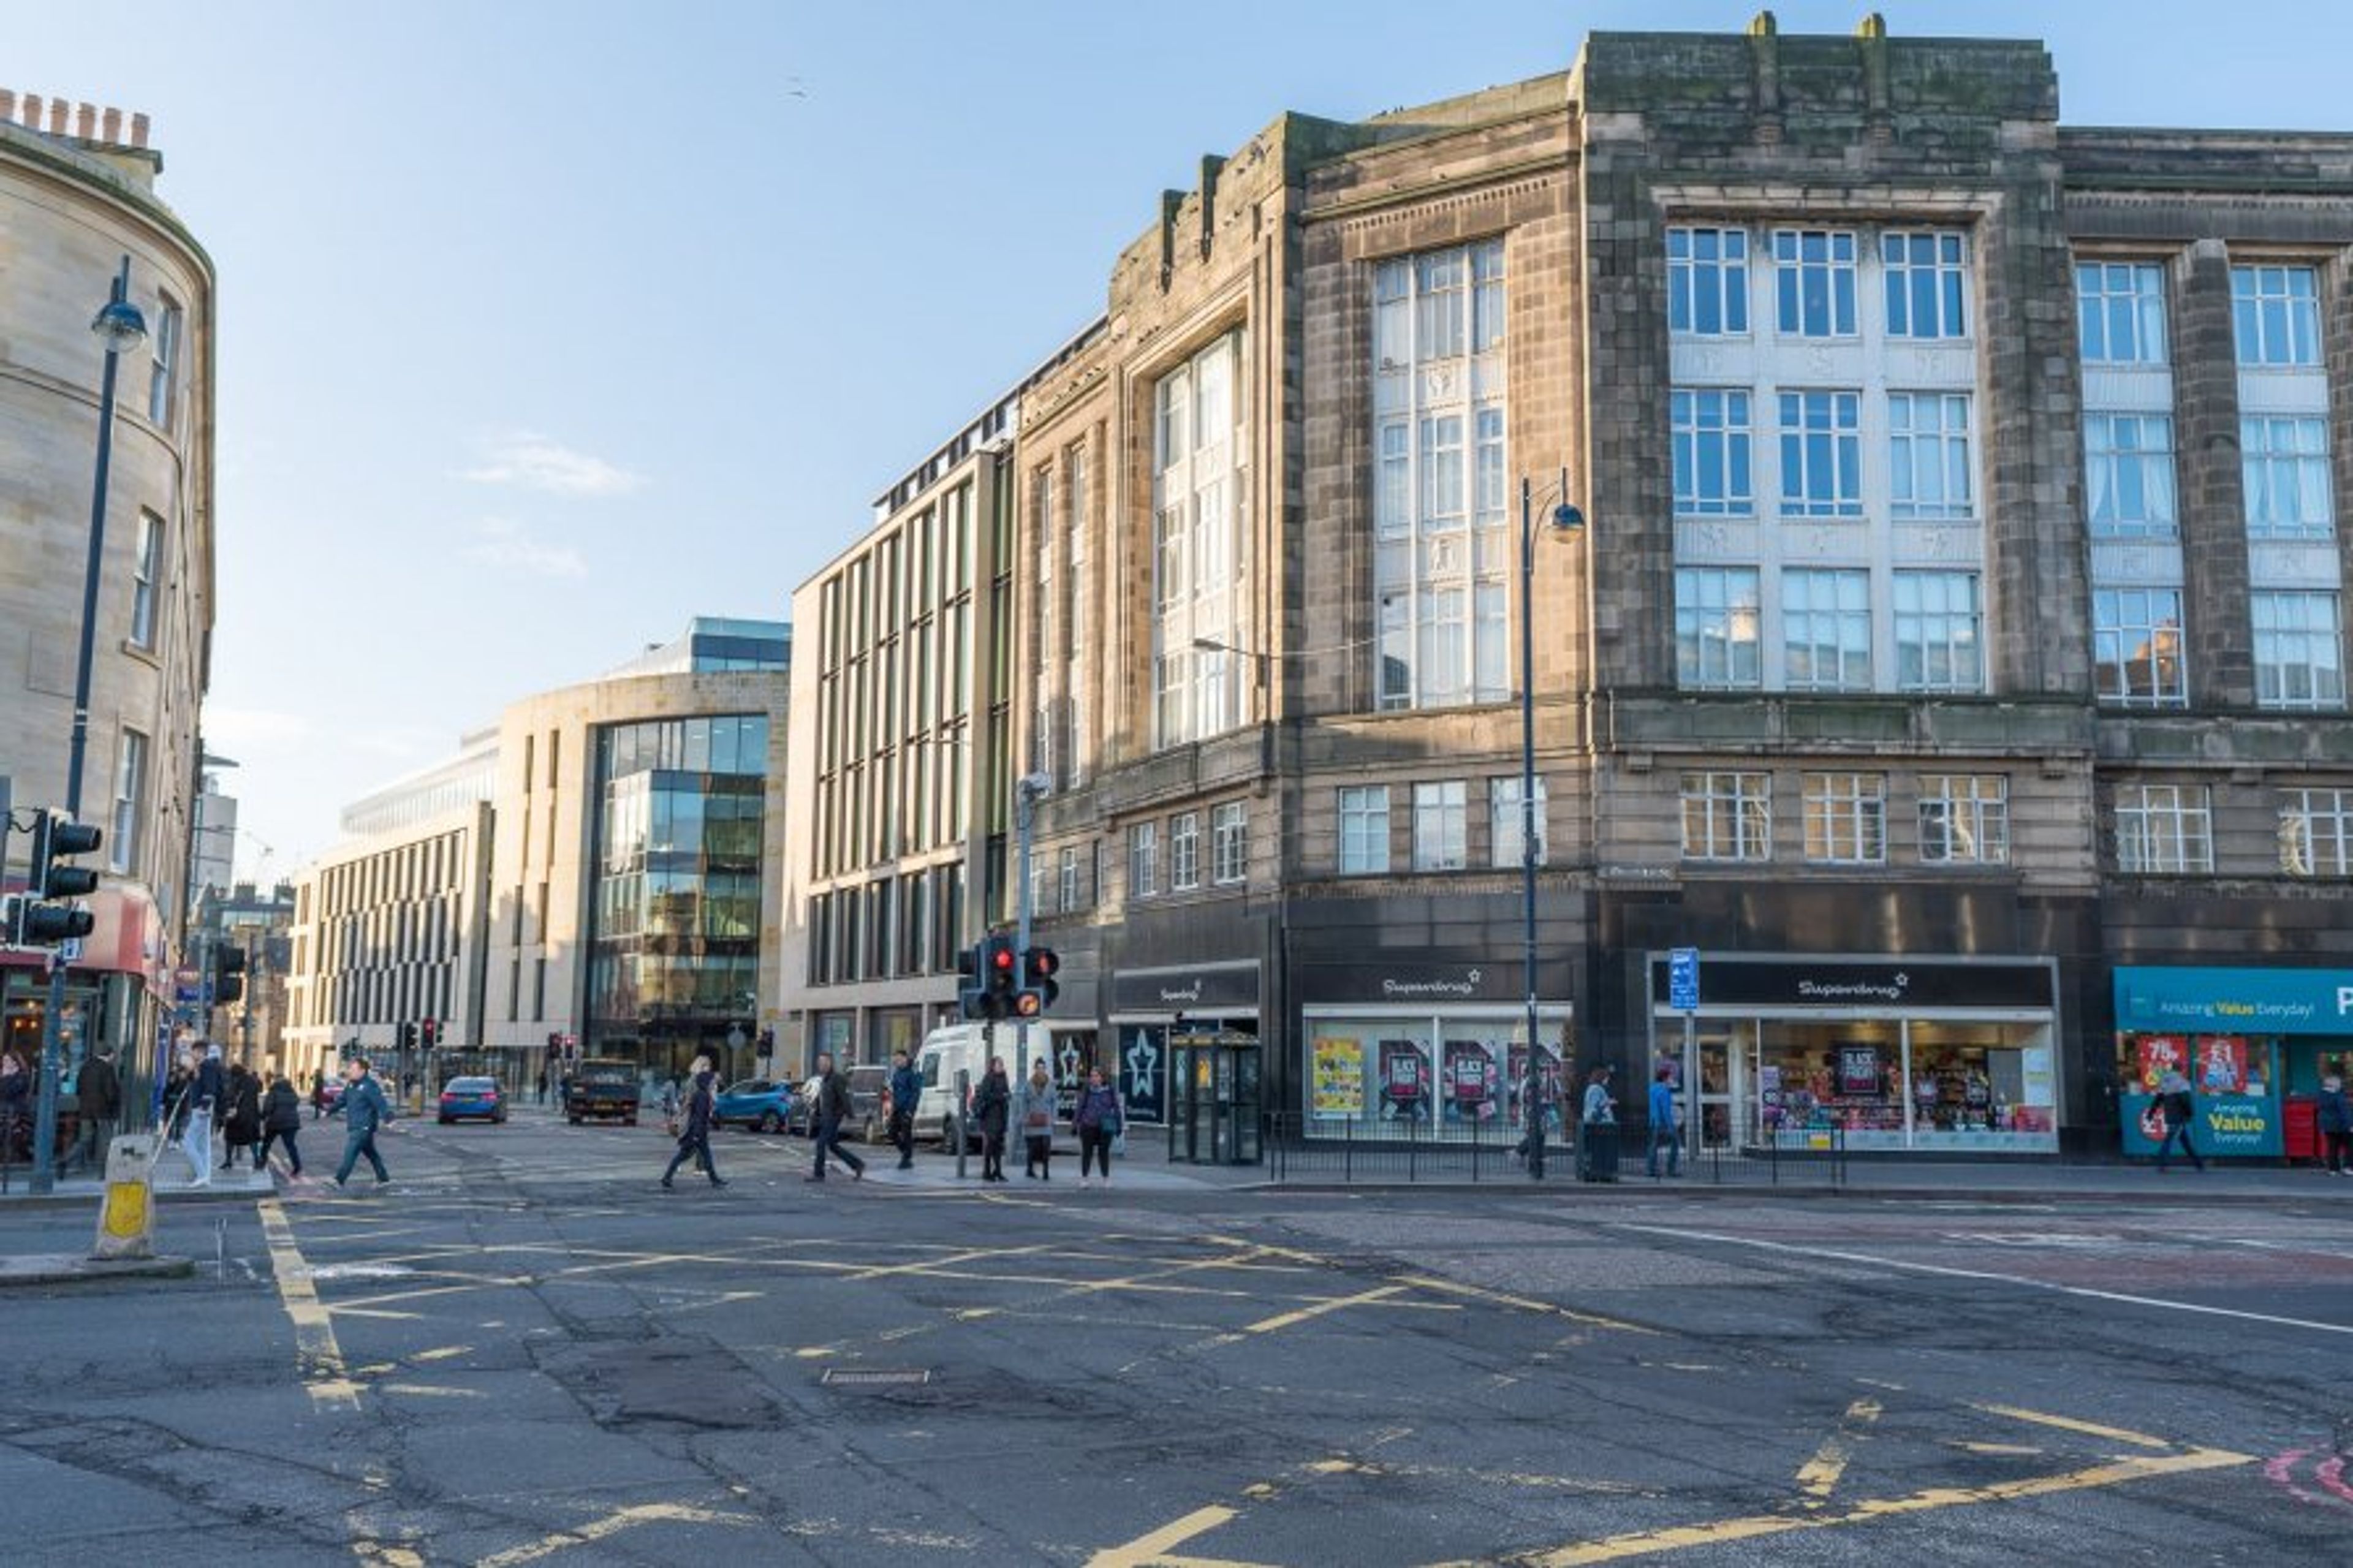 Situated on the iconic Lothian Road